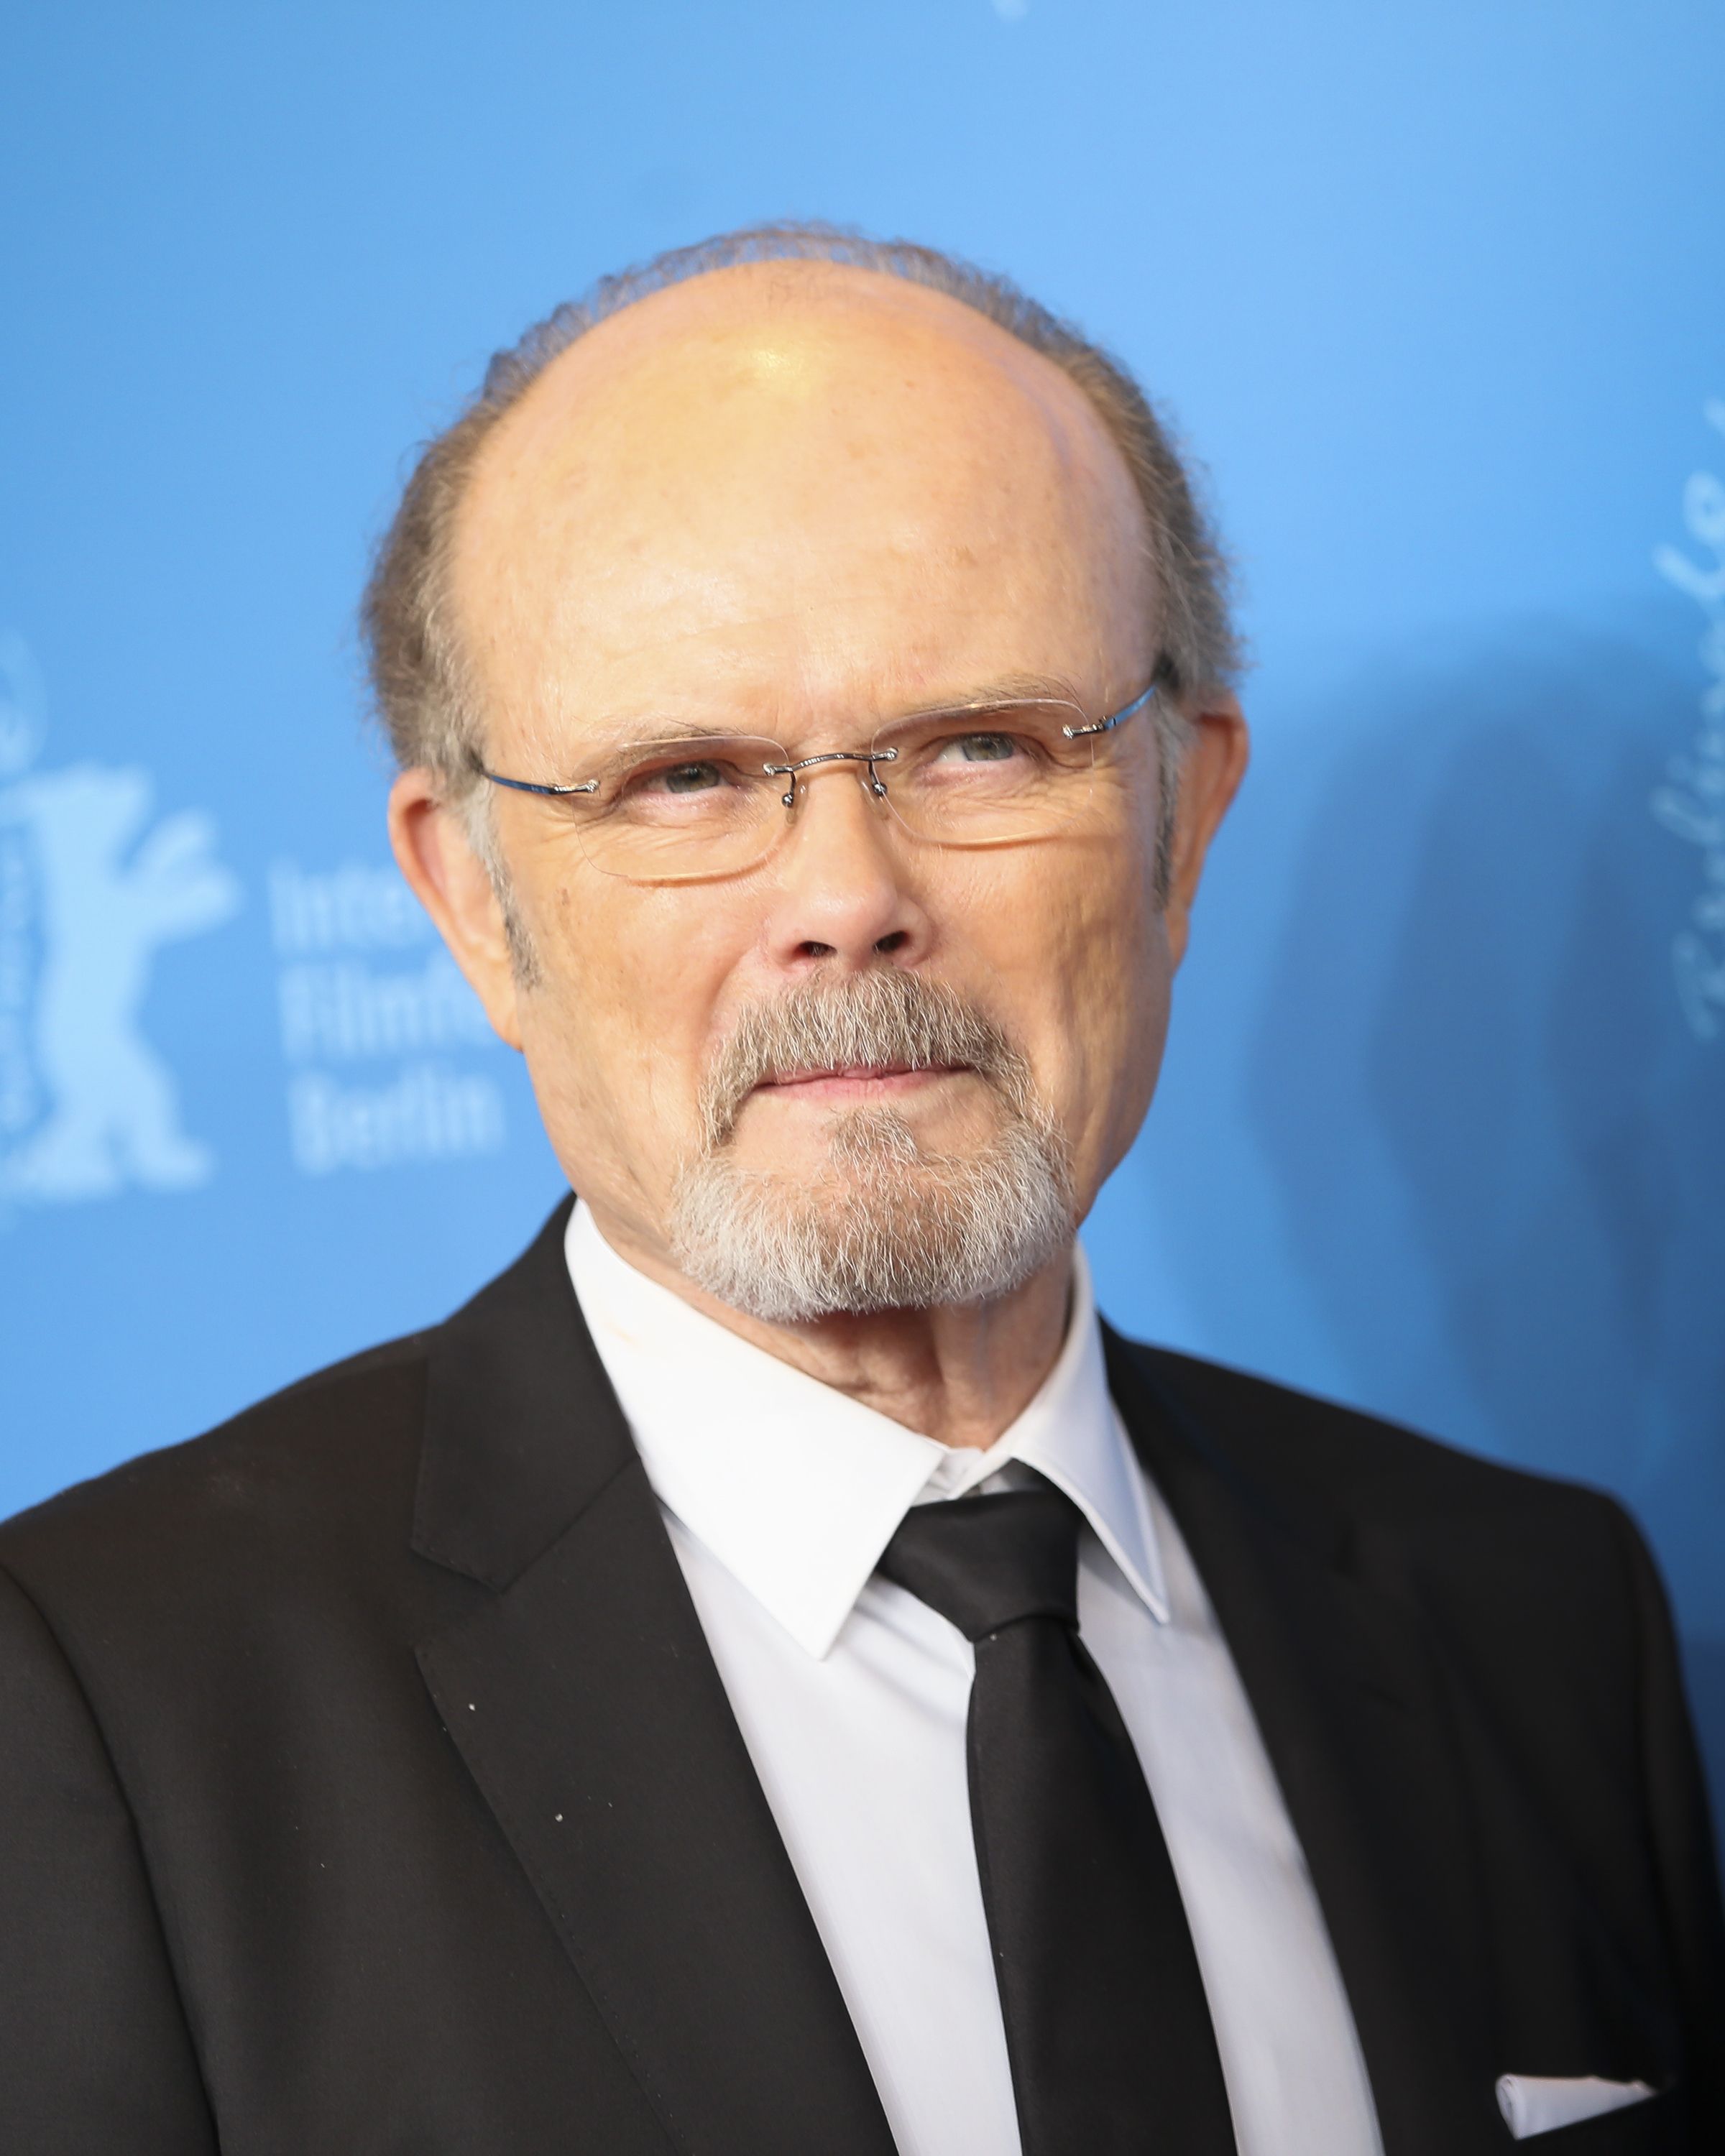 Kurtwood Smith smiles in glasses and a black suit.